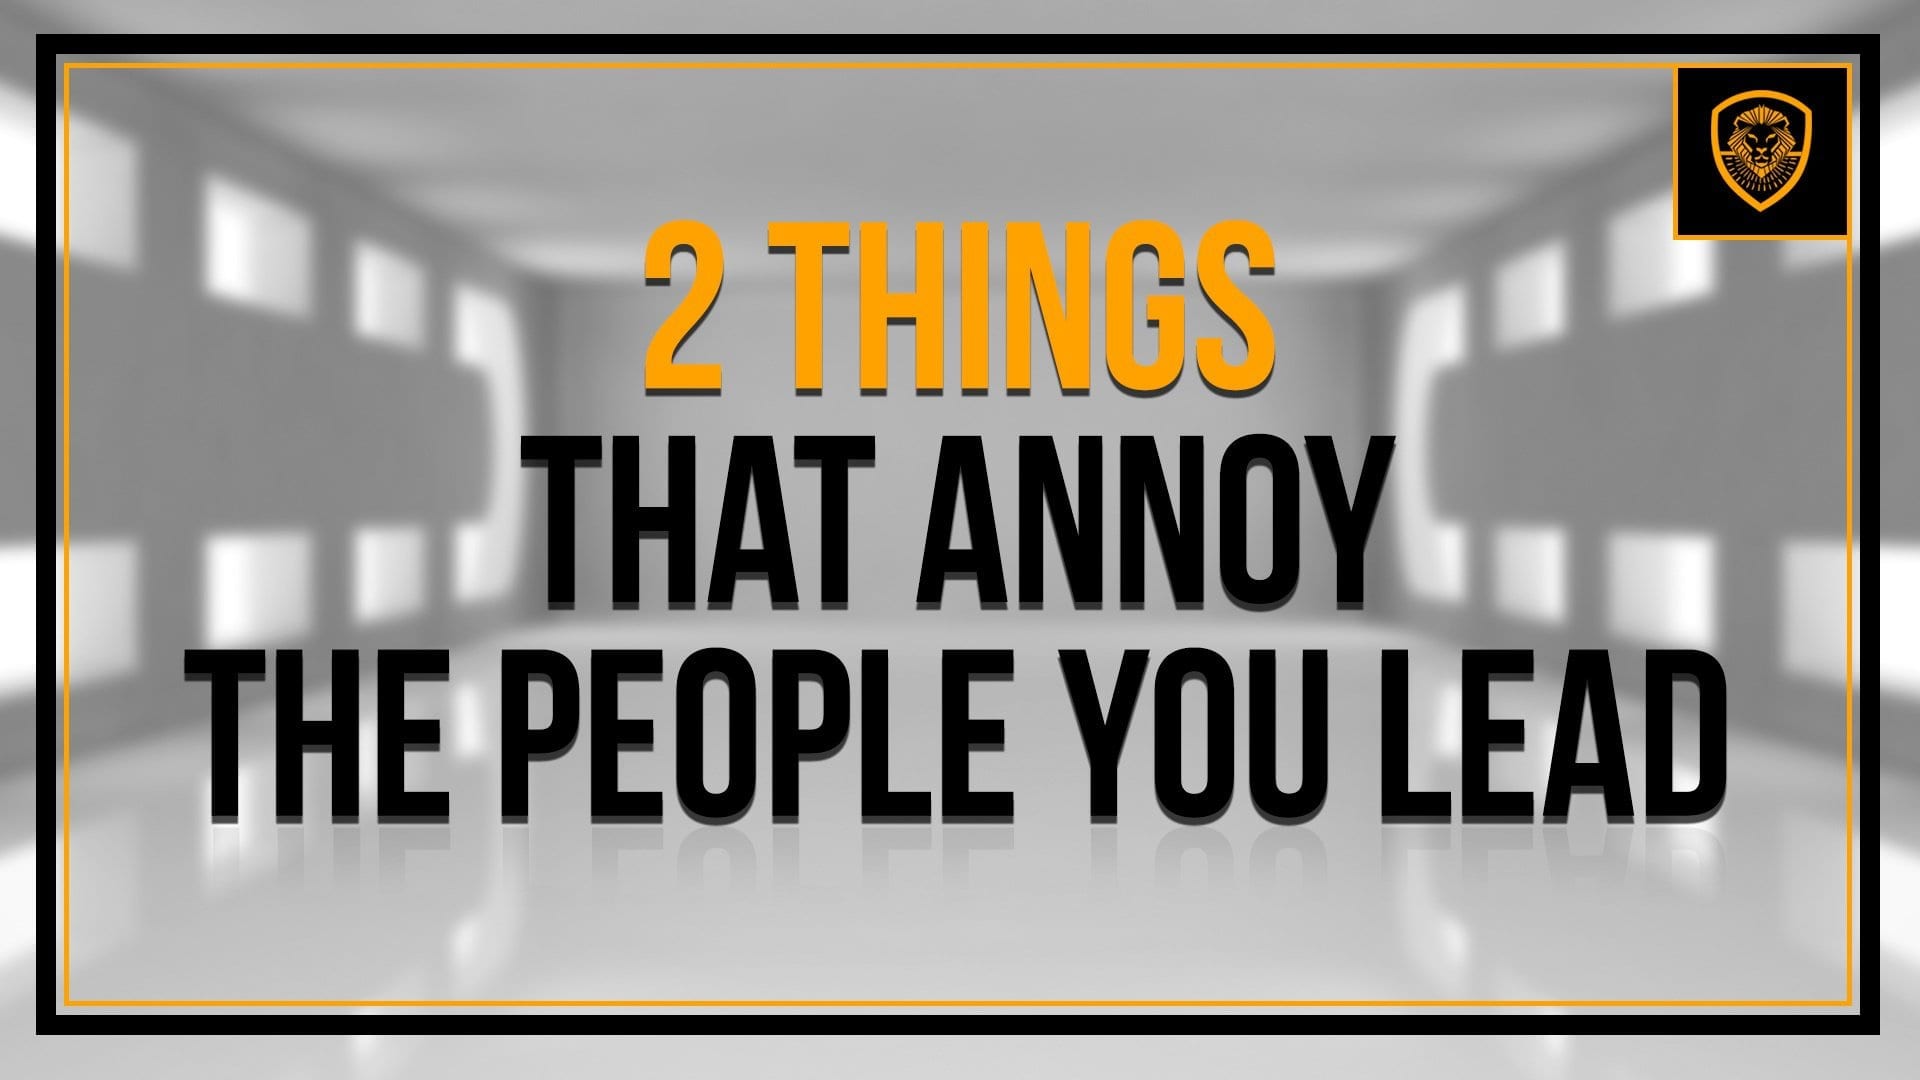 2 things that annoy the people you lead